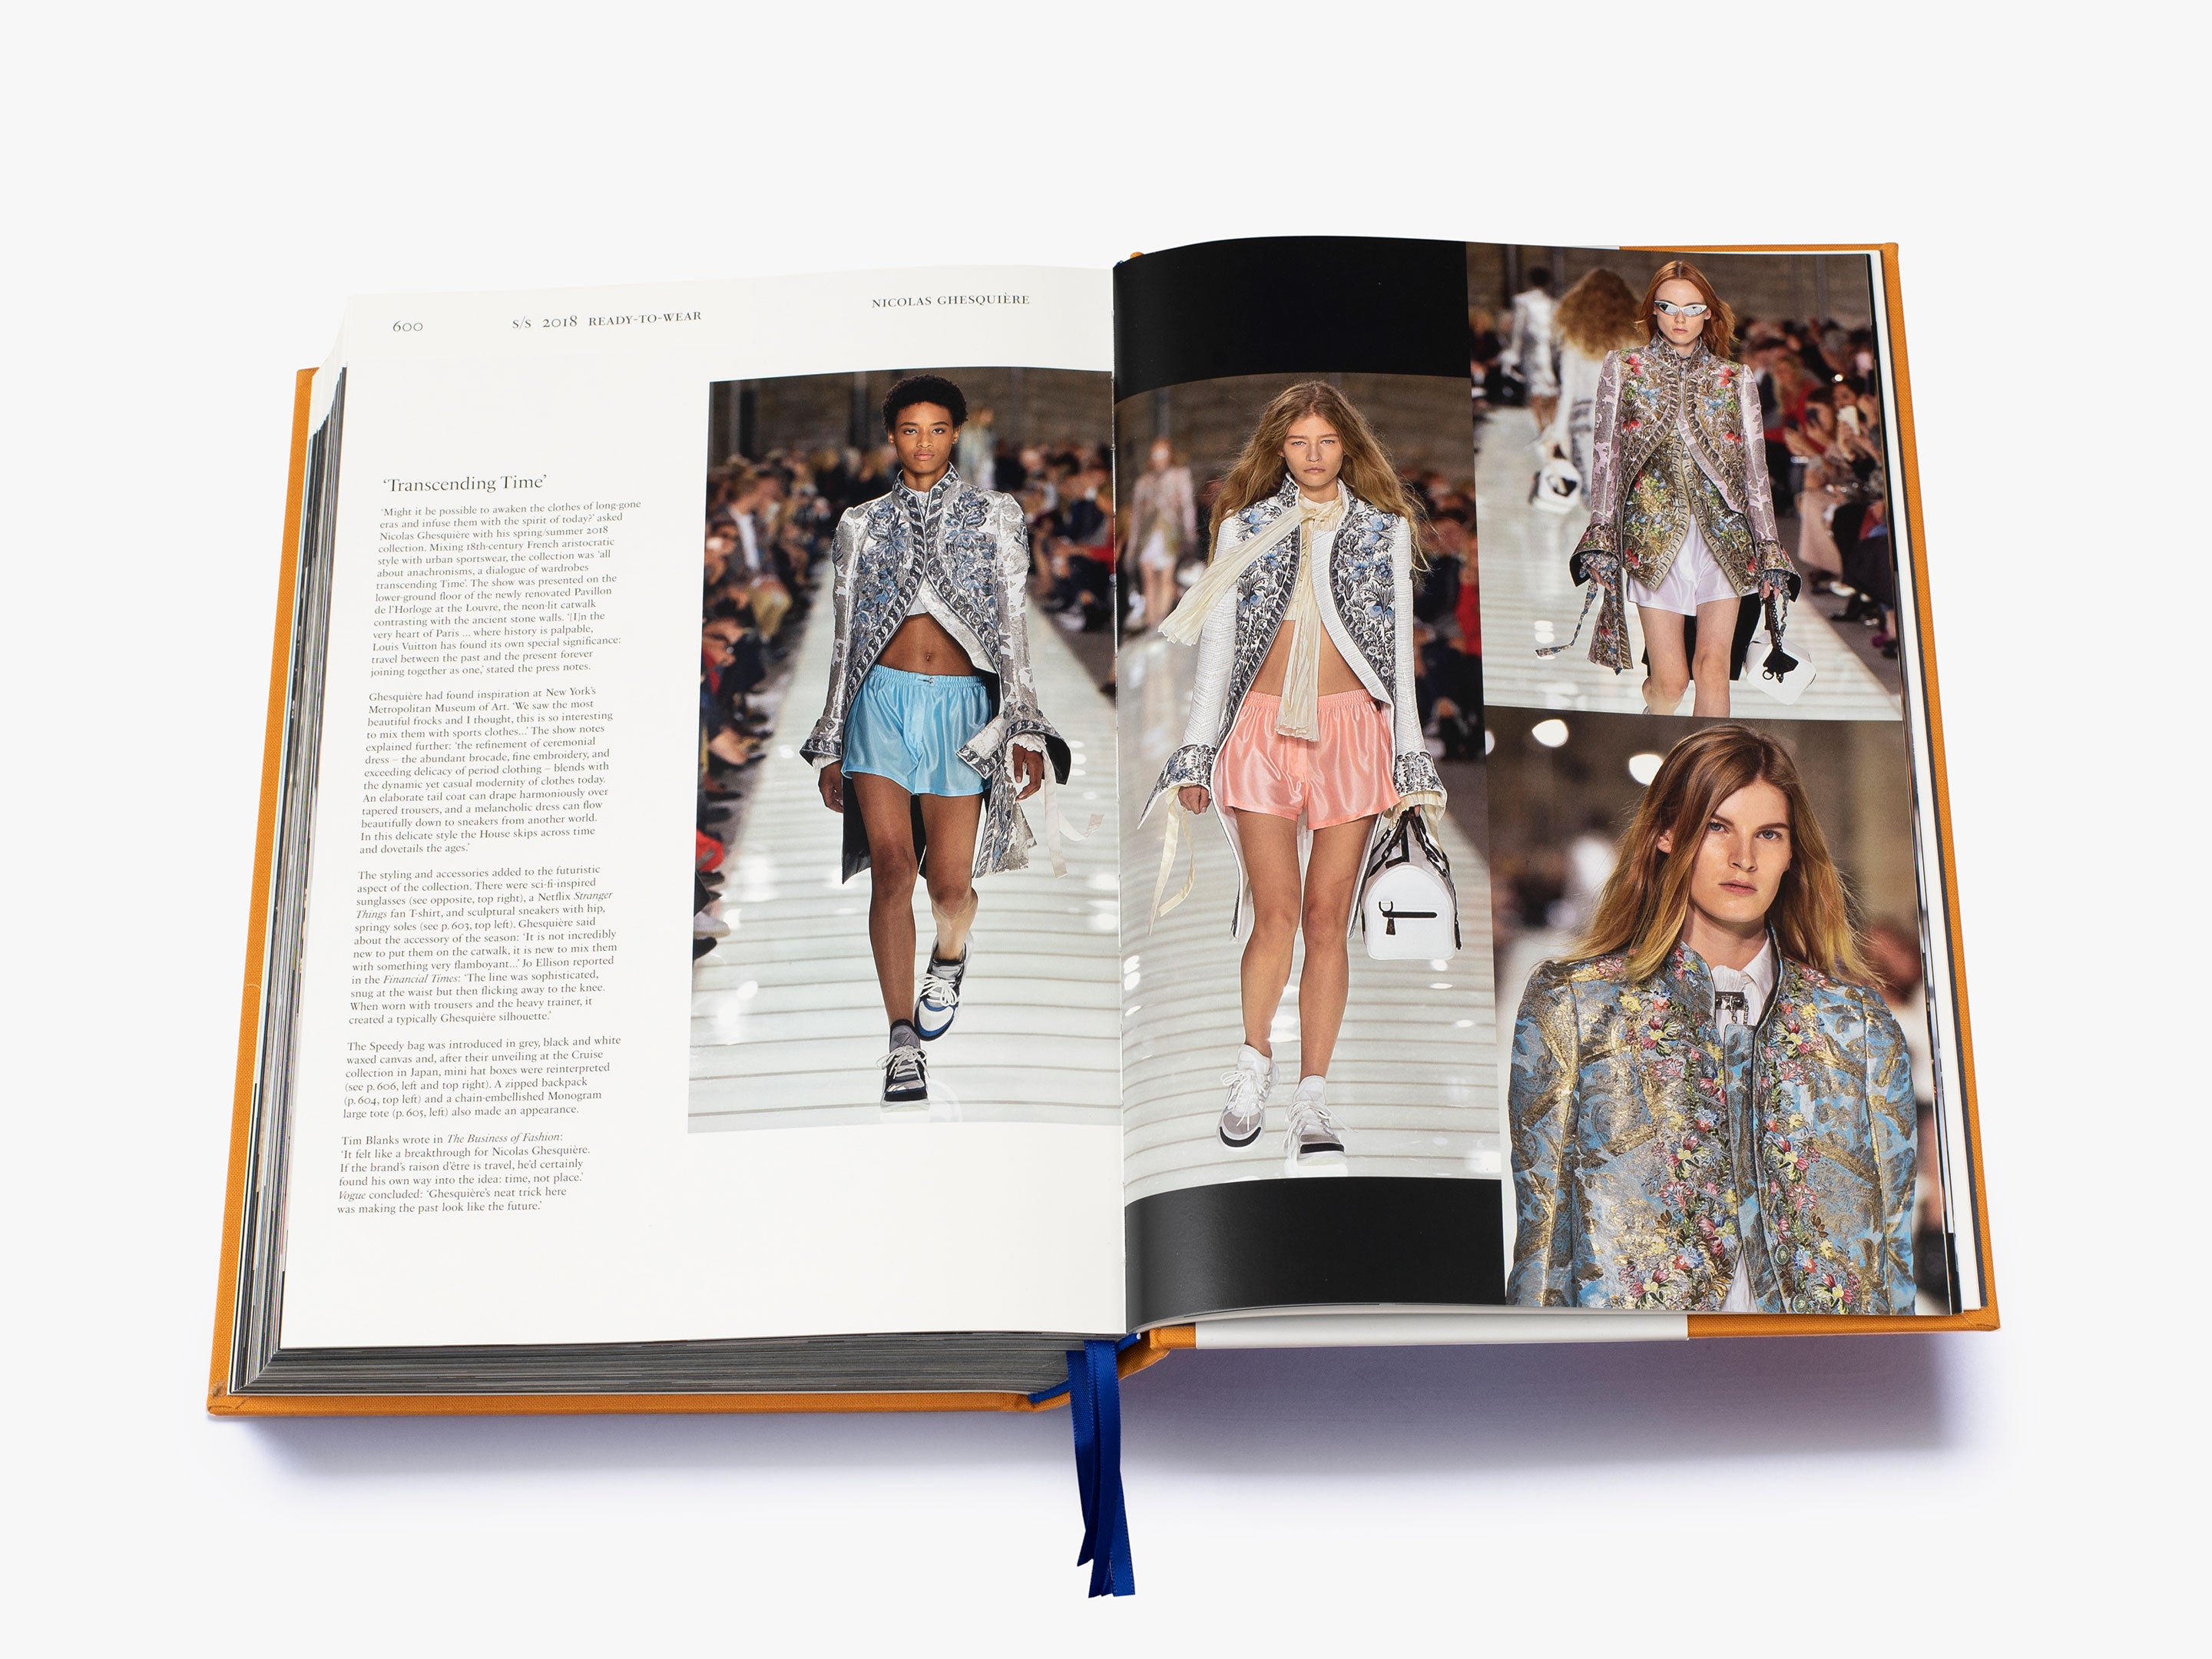 Louis Vuitton Catwalk: The Complete Collections